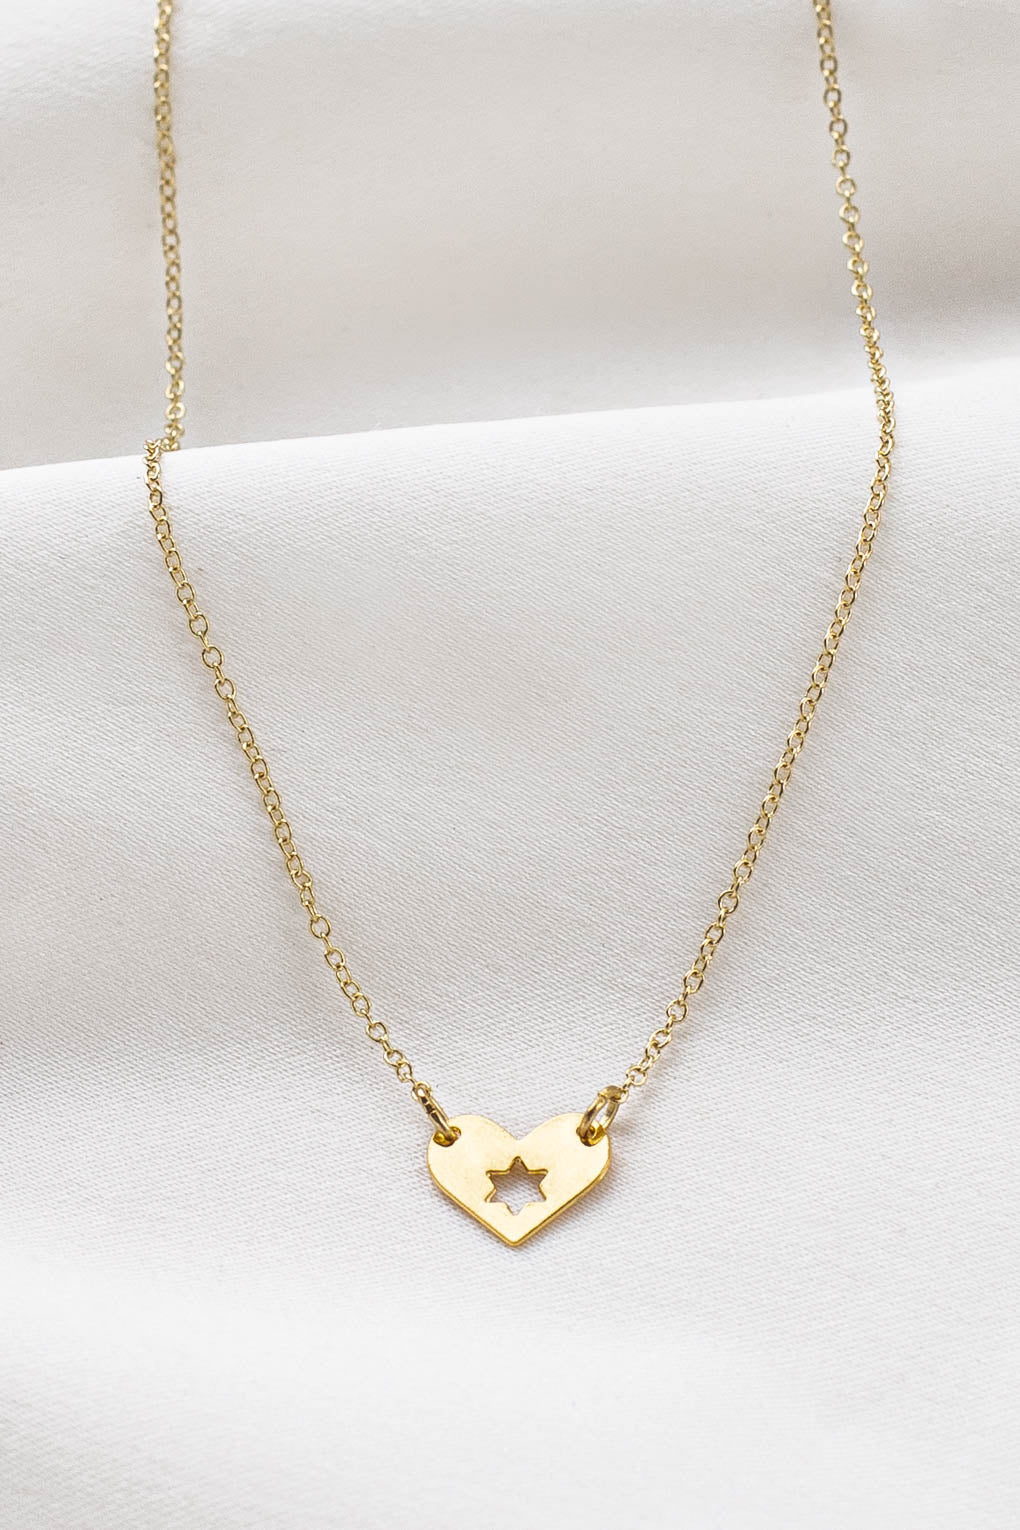 Israel At Heart Necklace